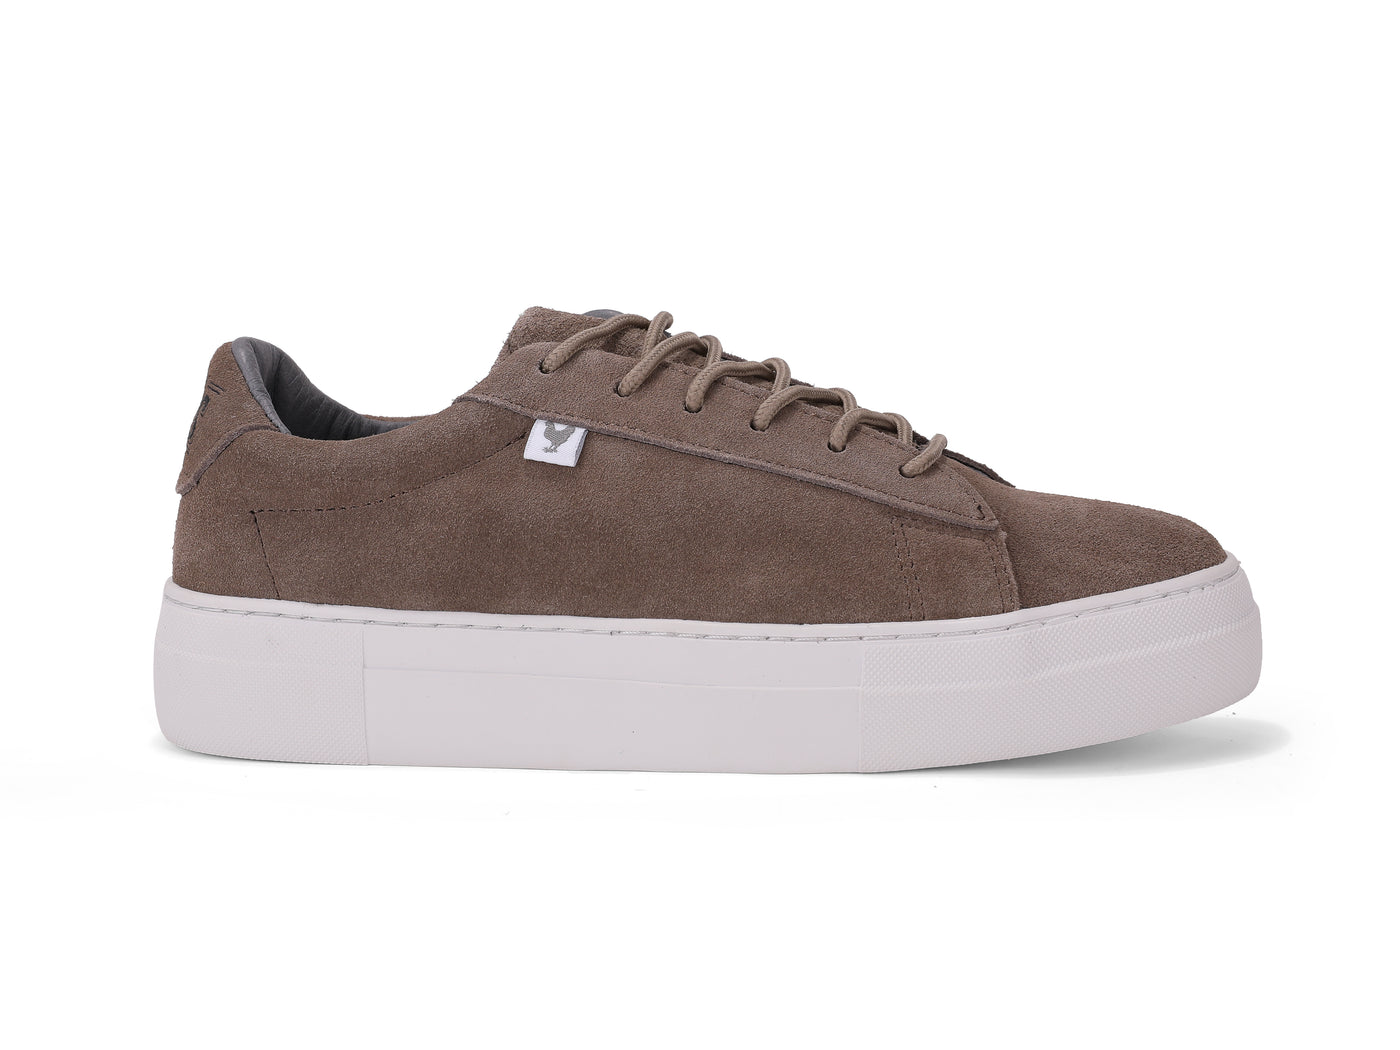 Taupe suede platform sneakers